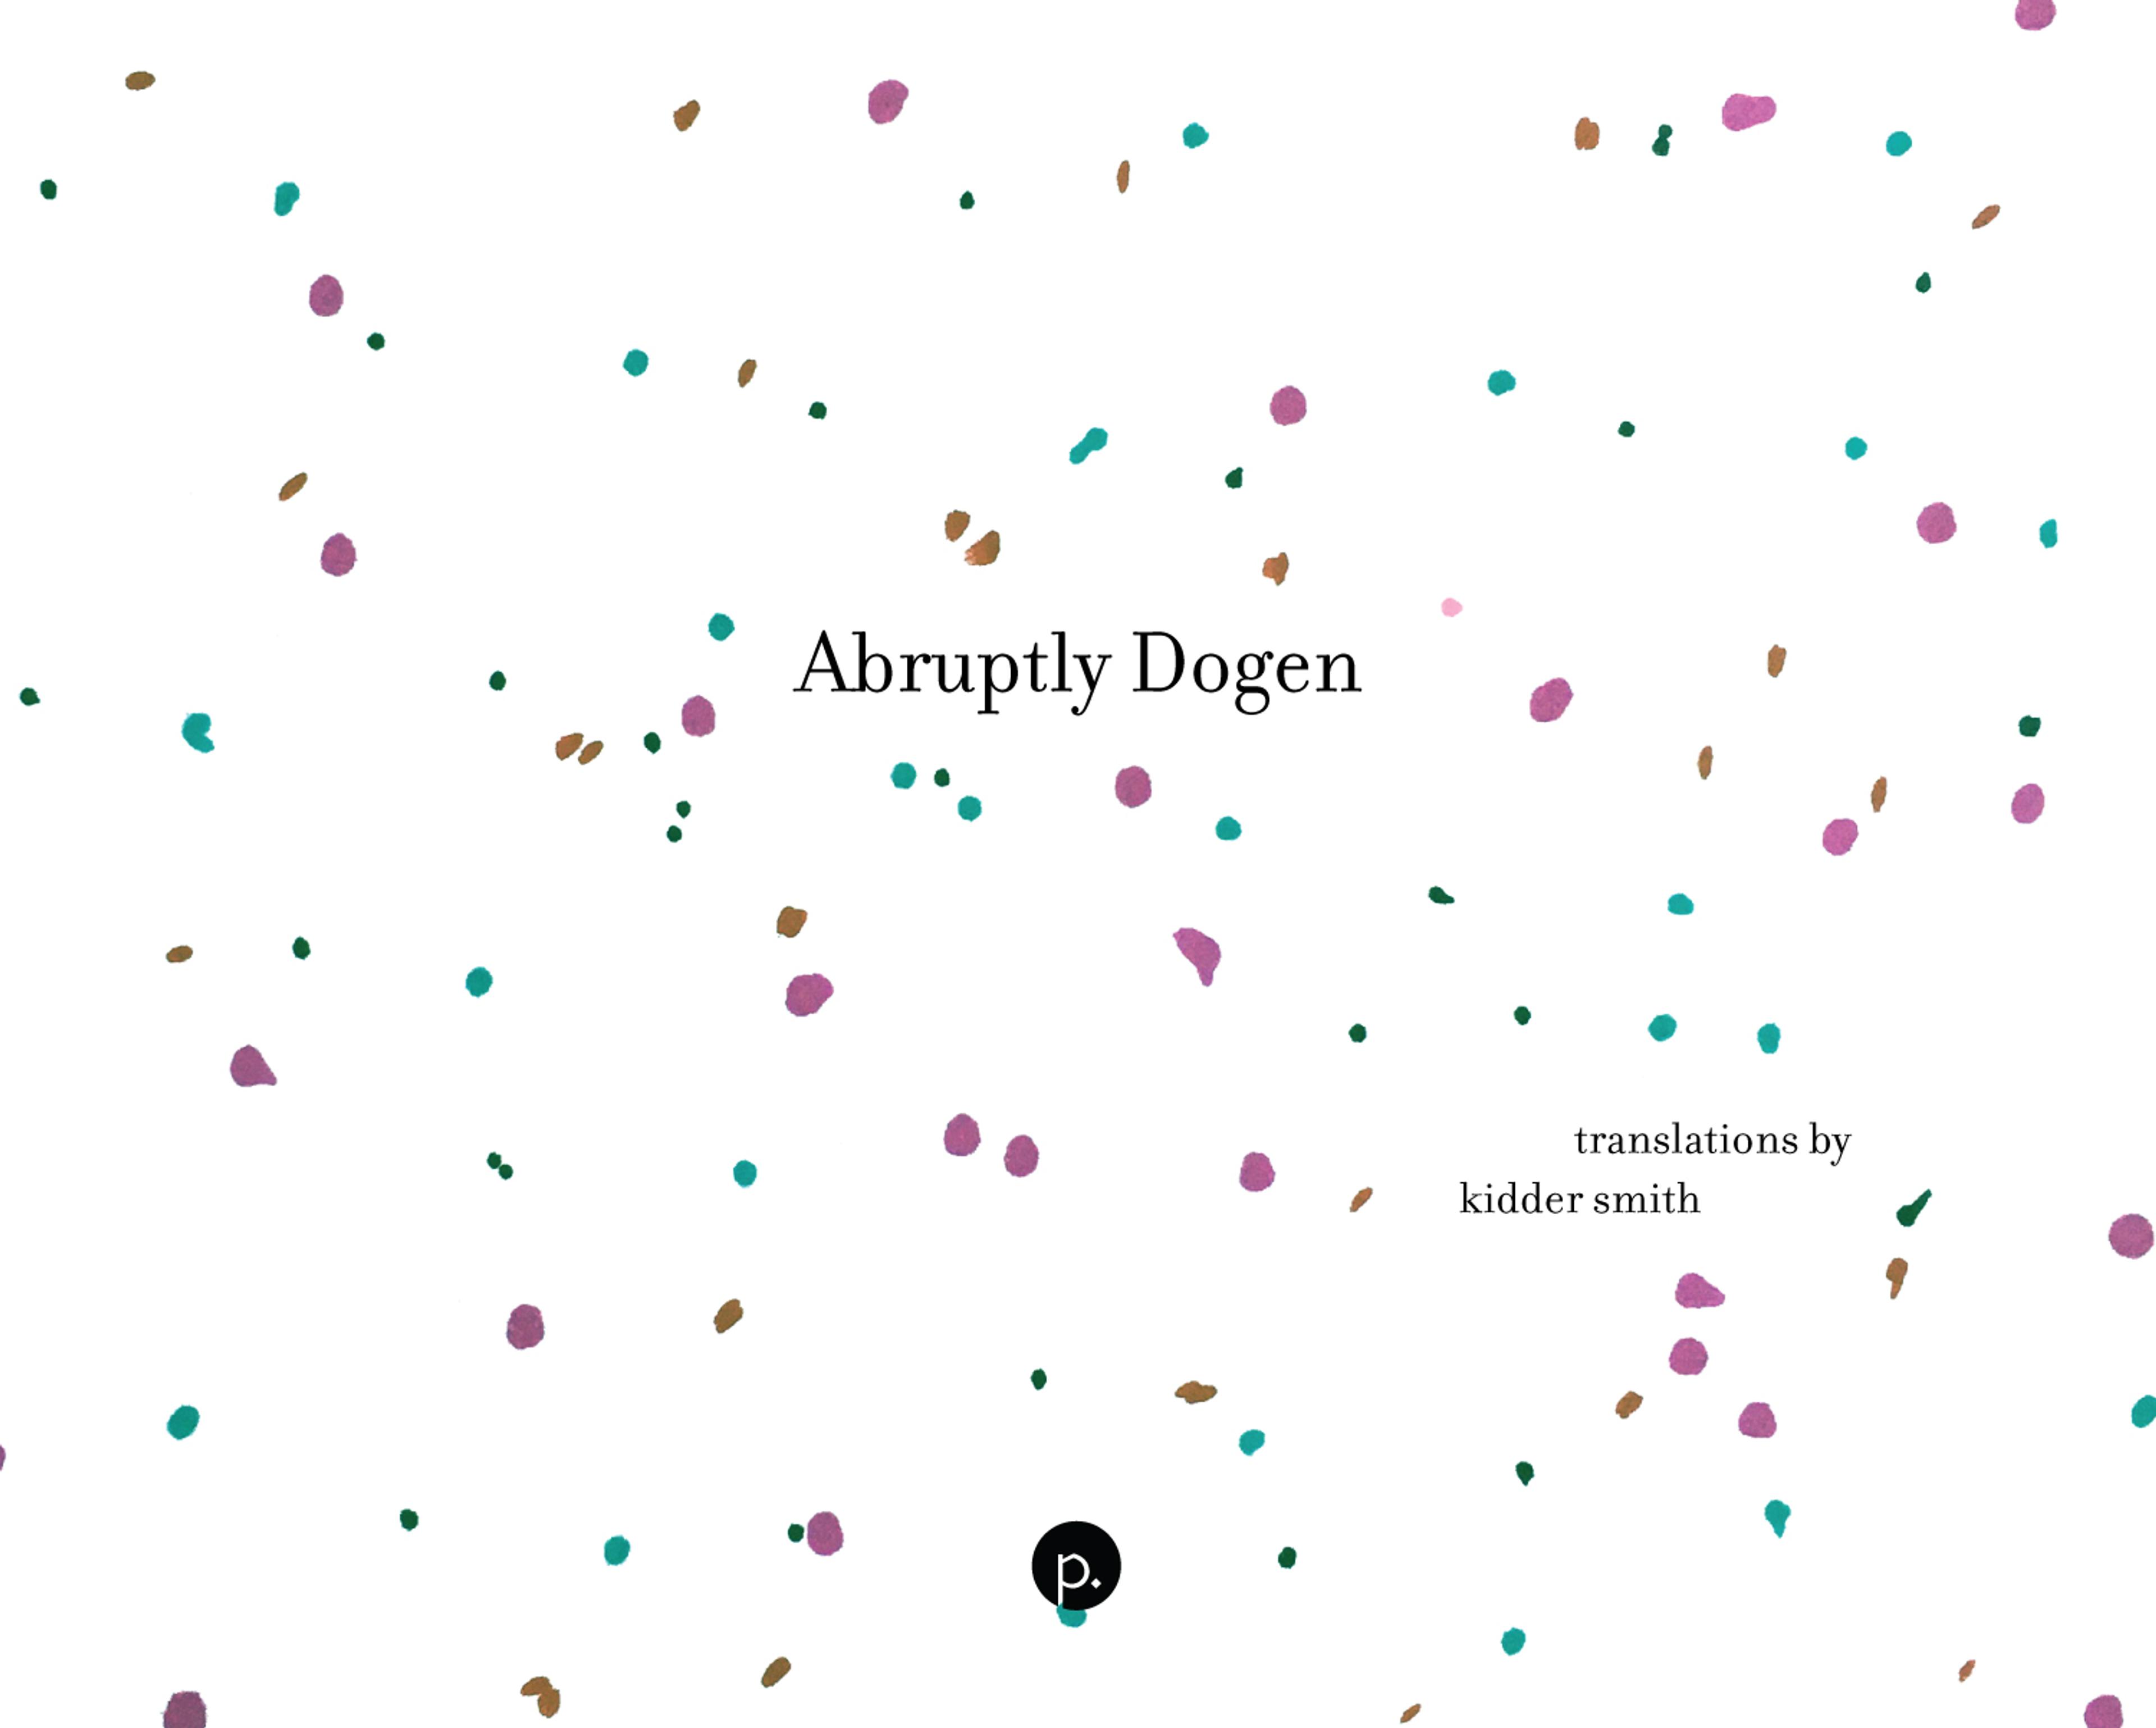 Cover of book titled Abruptly Dogen